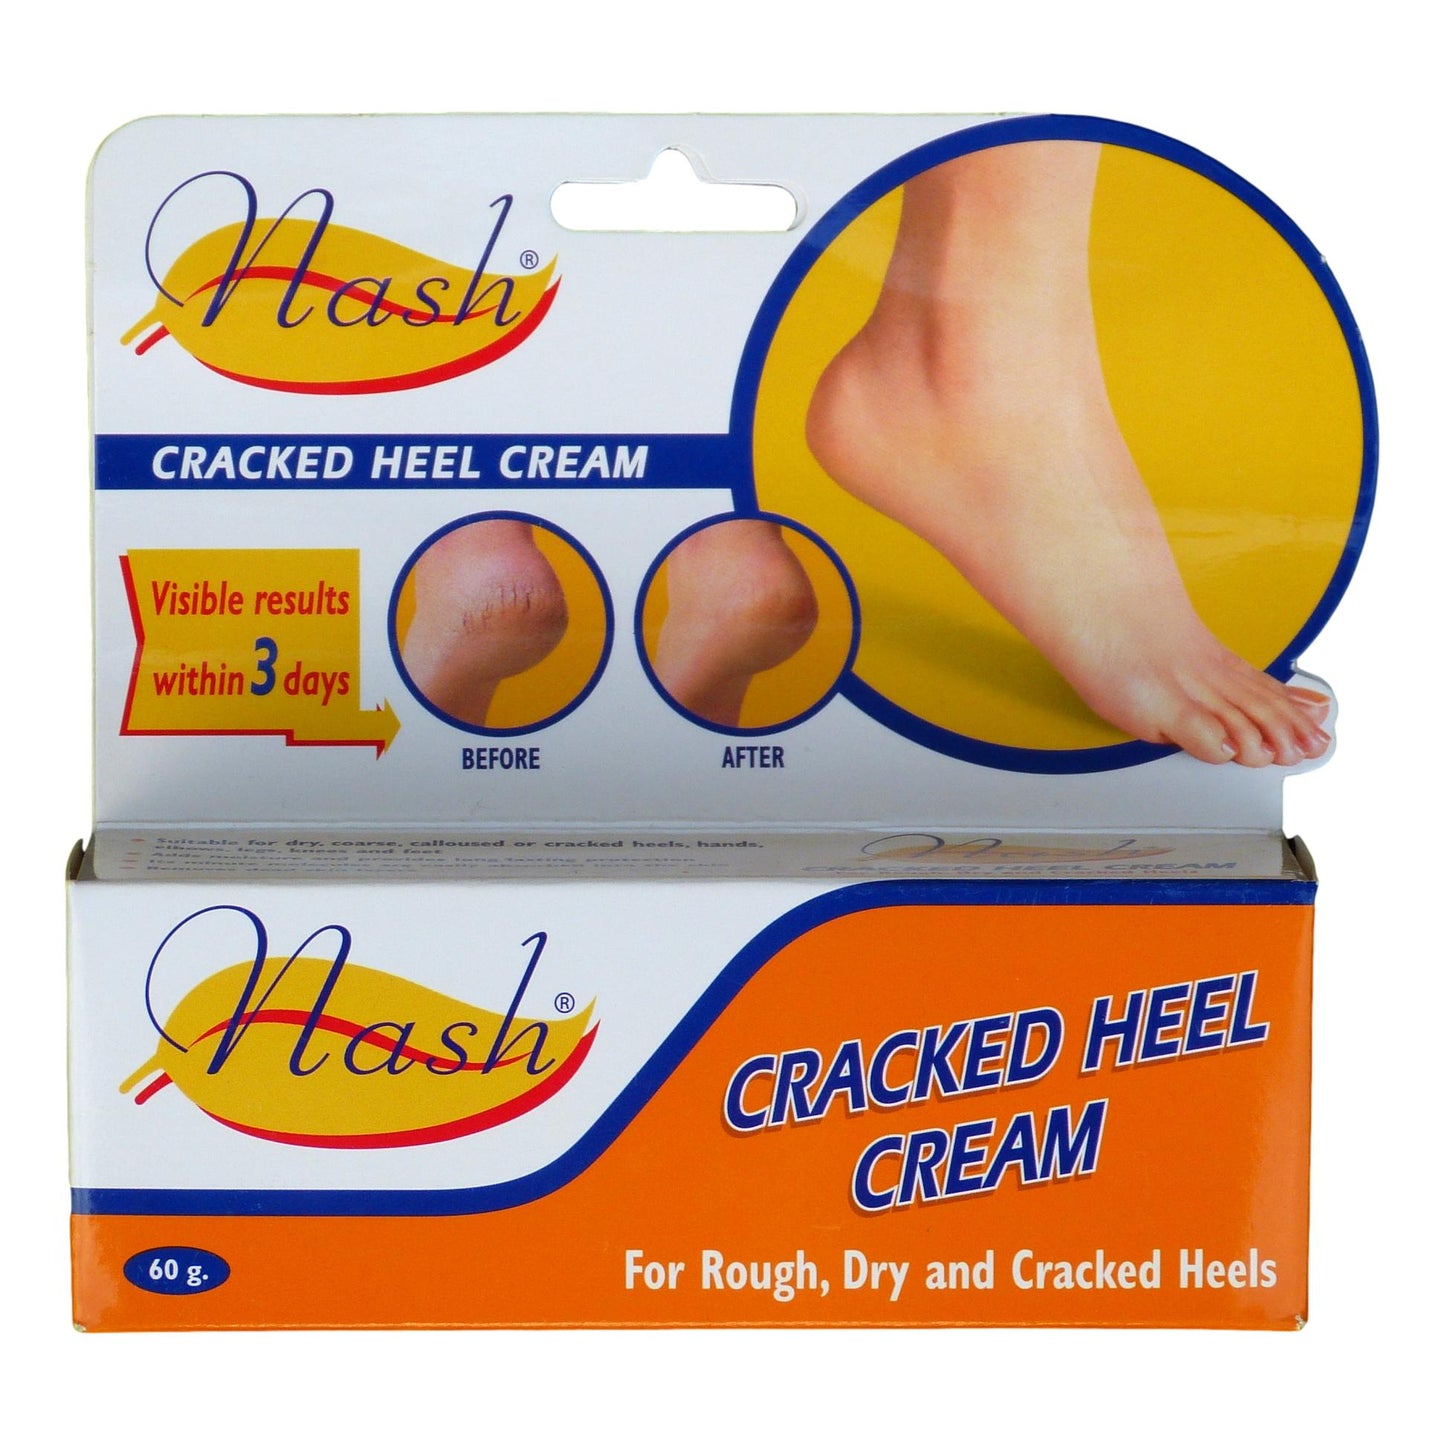 Nash Cracked Heel Cream for Rough, Dry and Cracked Heels 60g - Asian Beauty Supply